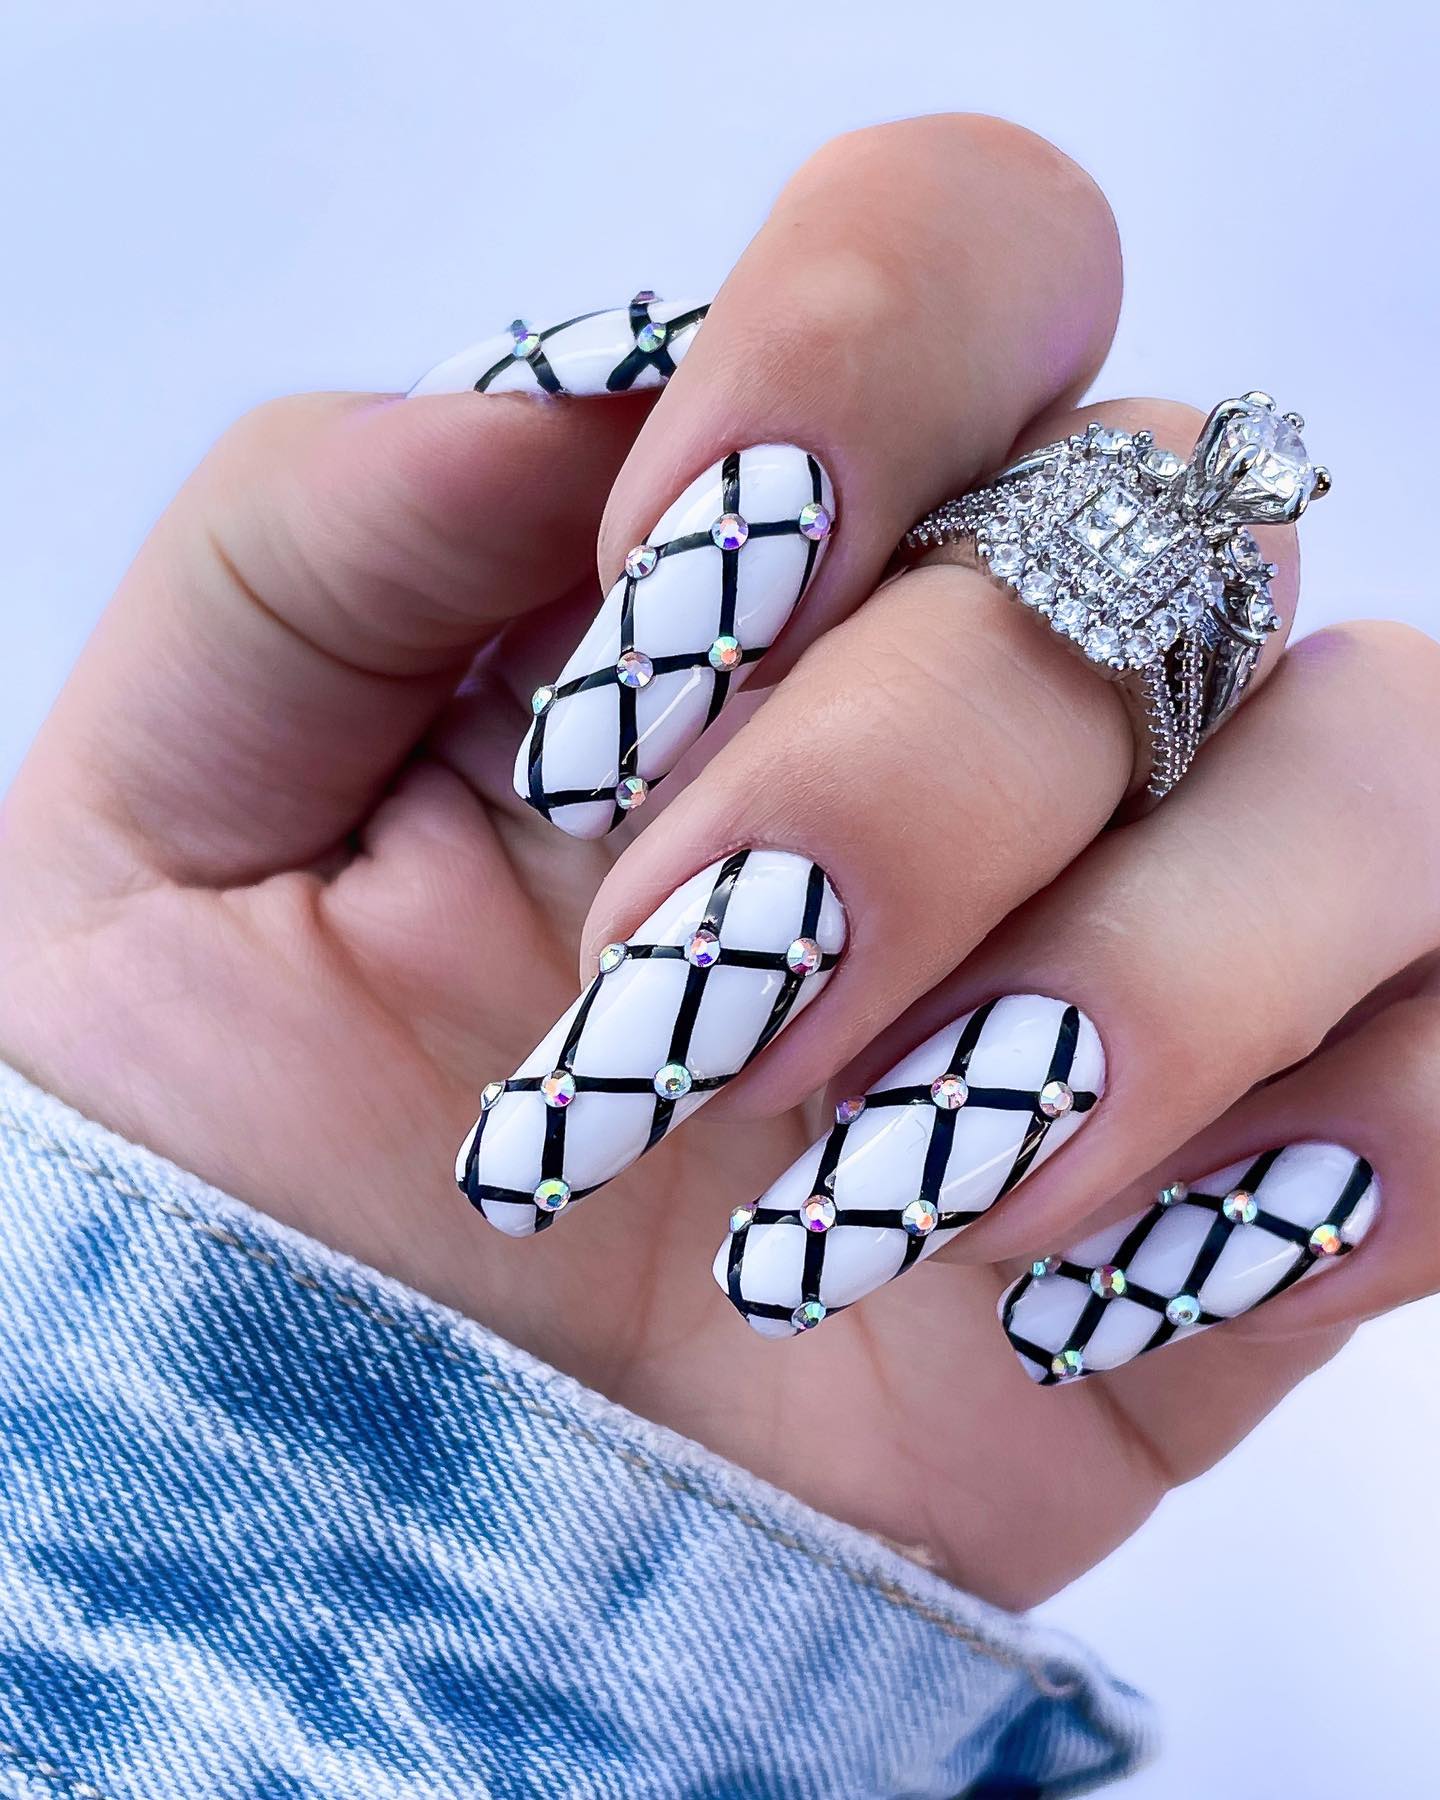 40 Stunning Geometric Nail Art Ideas You Must Try - Hairstyle